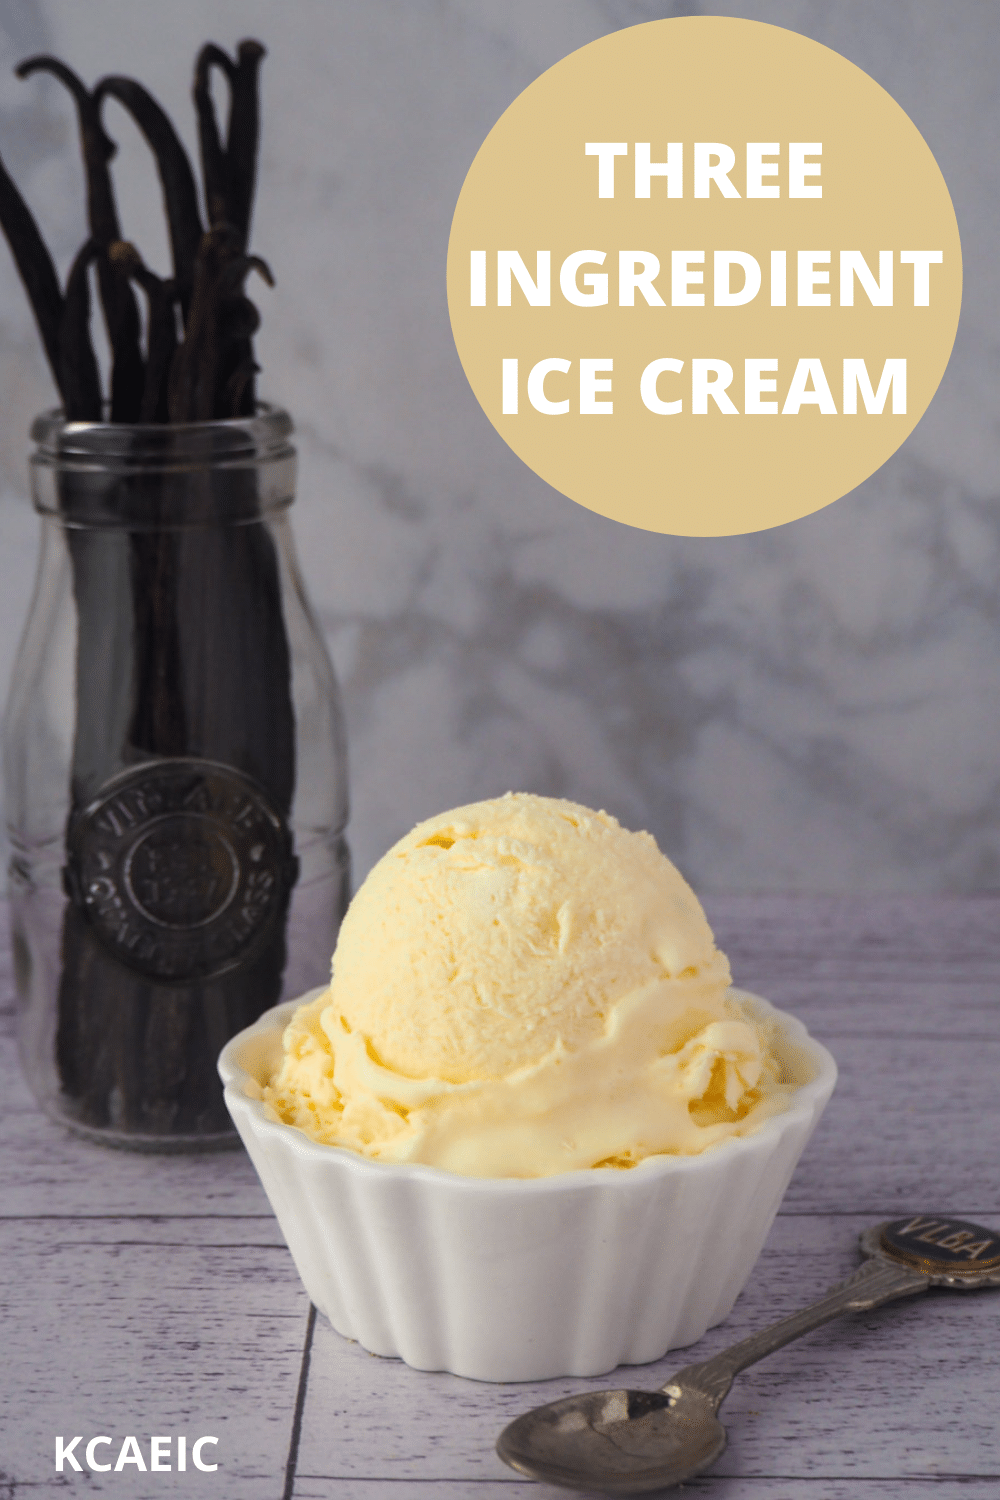 Scoop of ice cream with spoon and a jar of vanilla beans, with text overlay, three ingredient ice cream and KCAEIC.